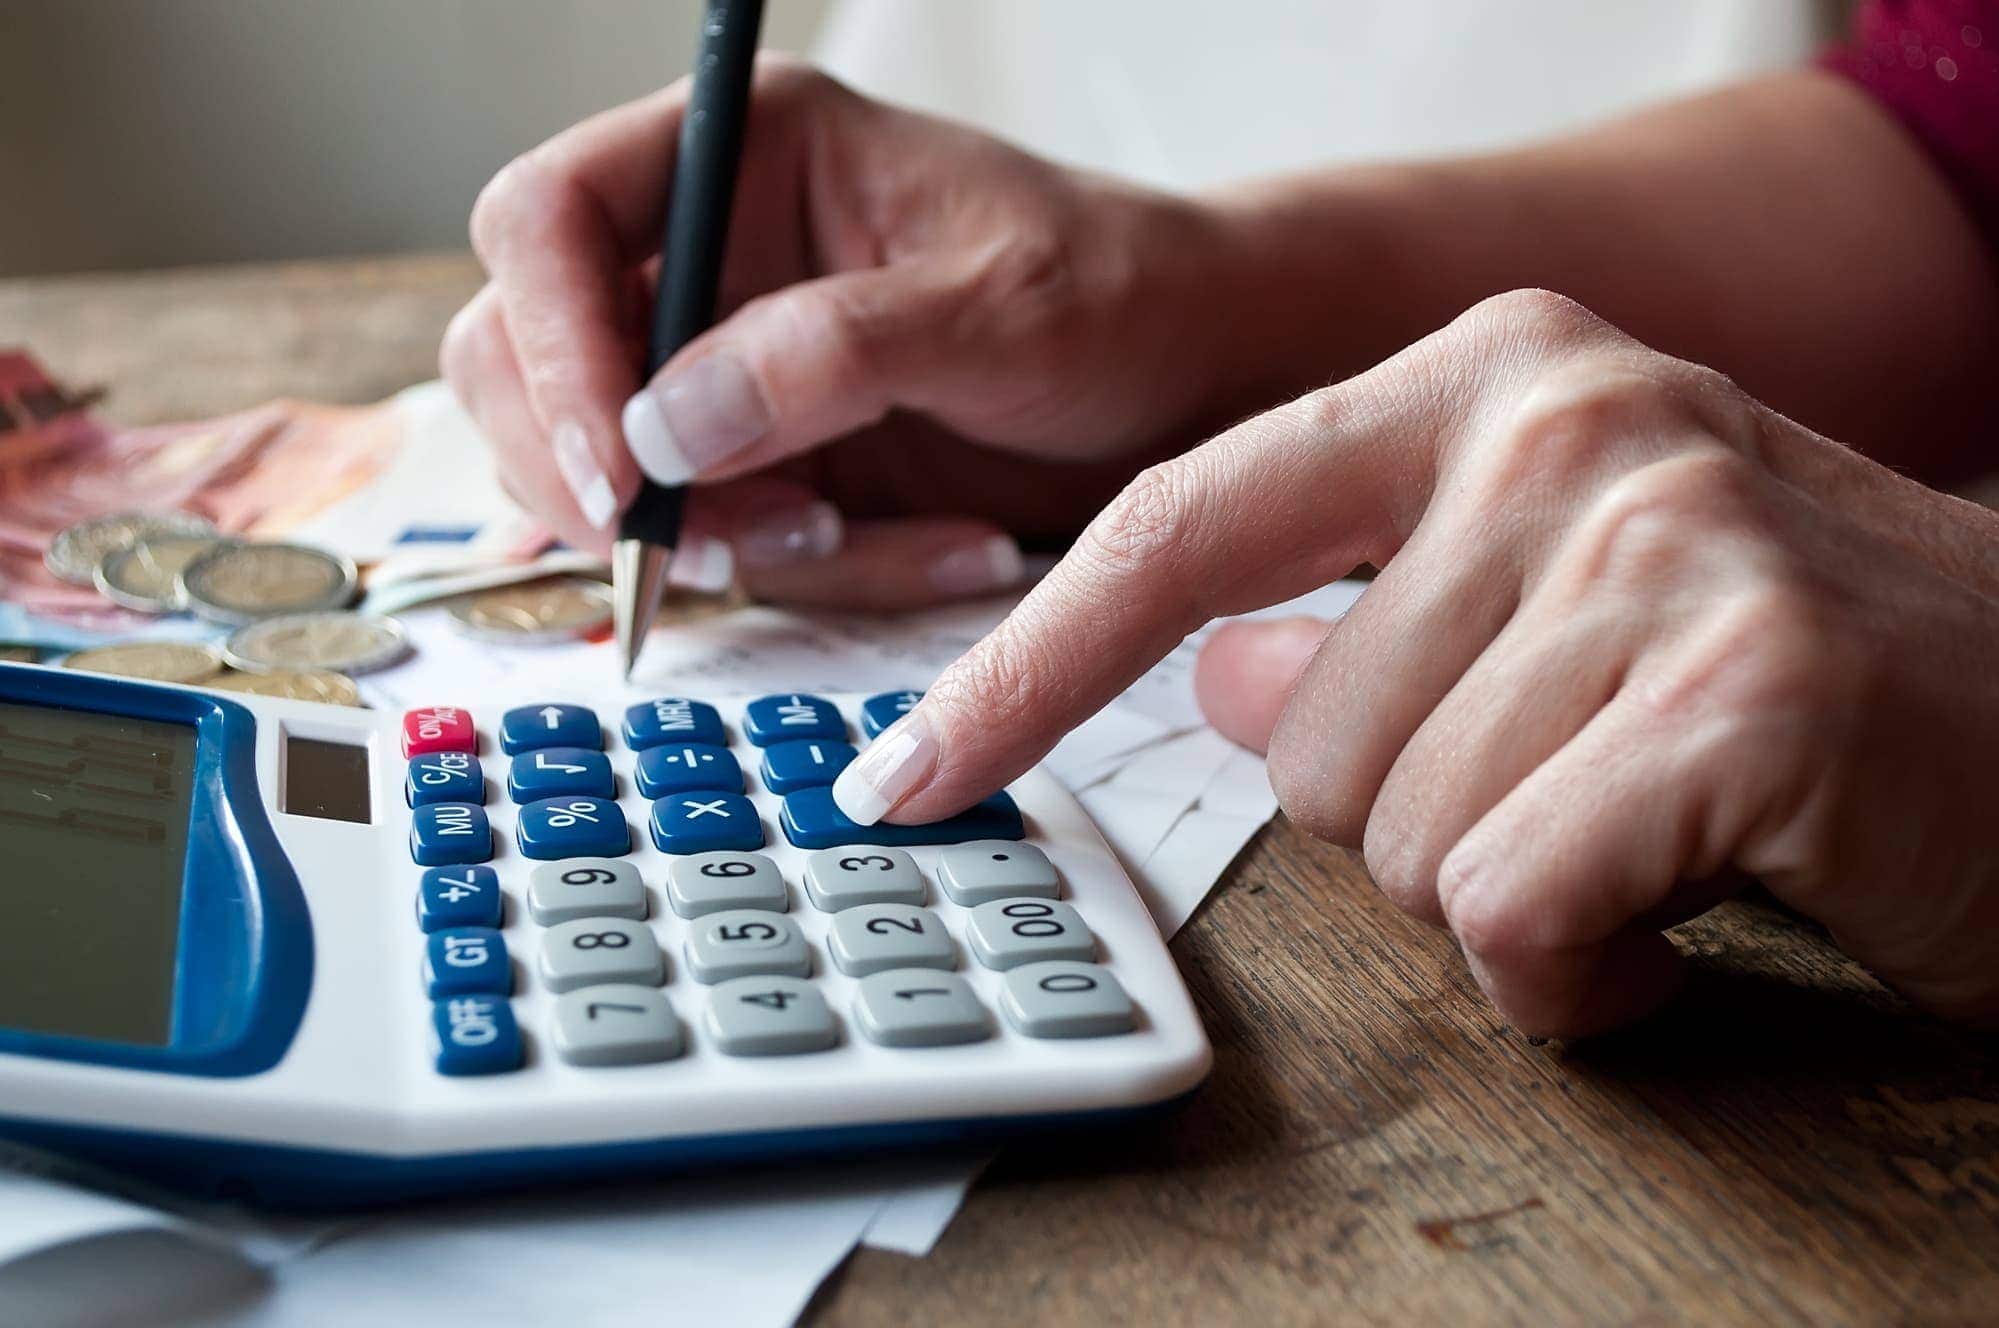 Bankruptcy Planning with a calculator